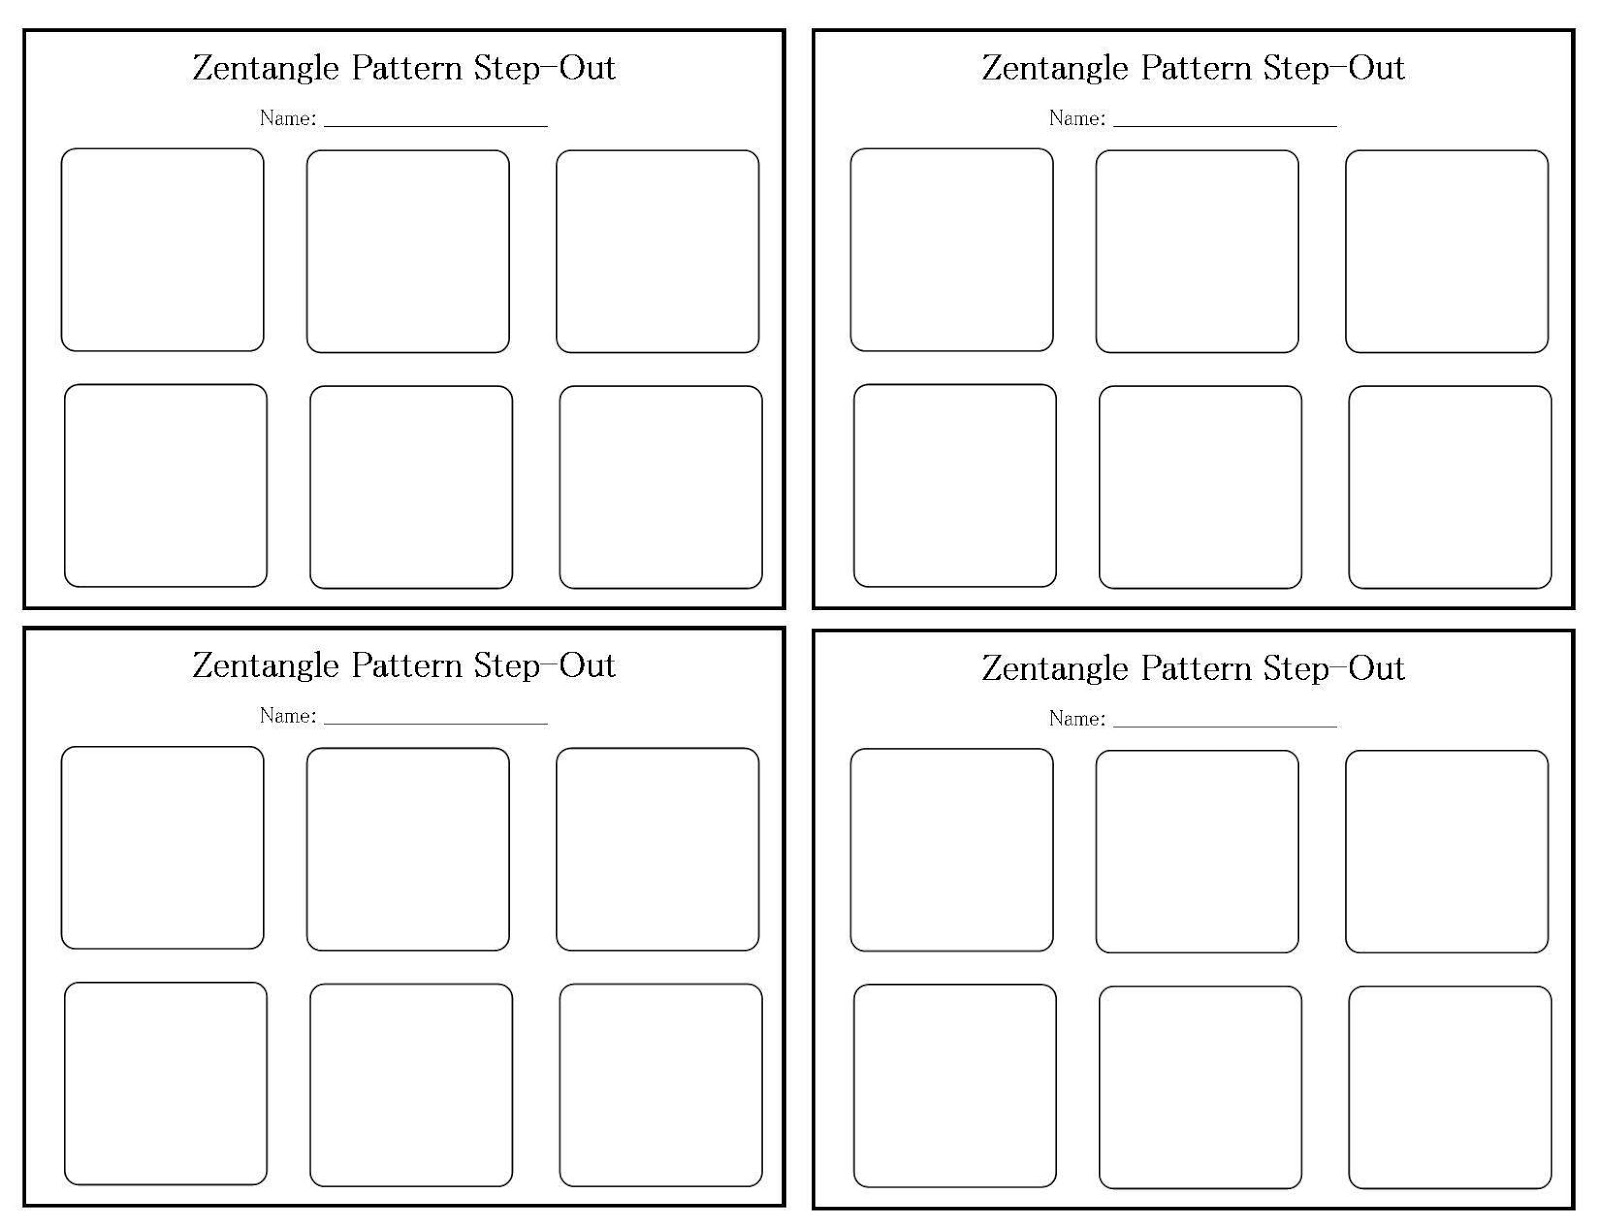 My Blank Step-Out Template For Zentangle Â® Patterns